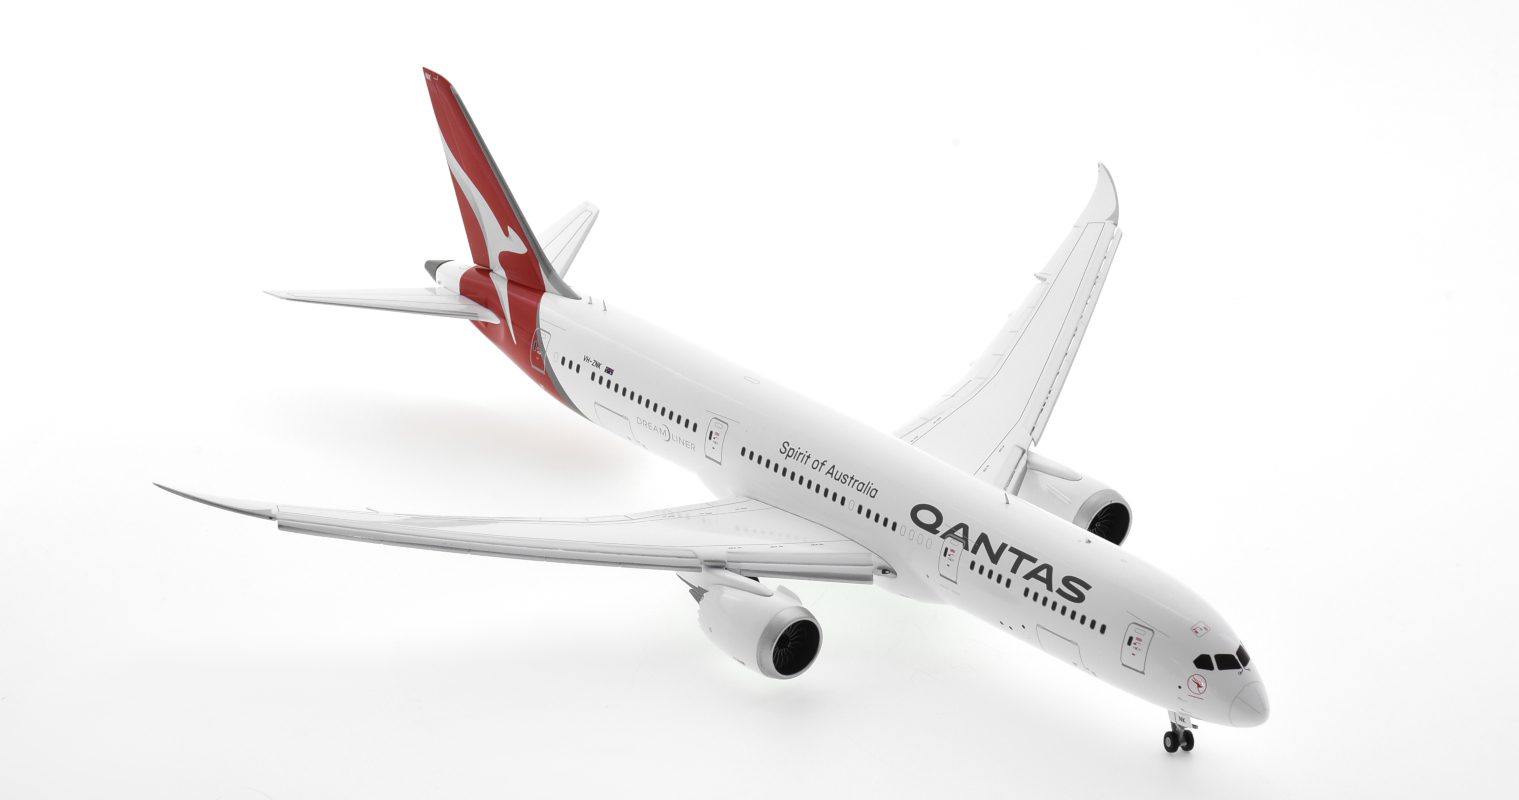 Front starboard side view of Gemini Jets G2QFA983F - 1/200 scale diecast model of the Boeing B787-9 Dreamliner with flaps down, registration VH-ZNK, named 